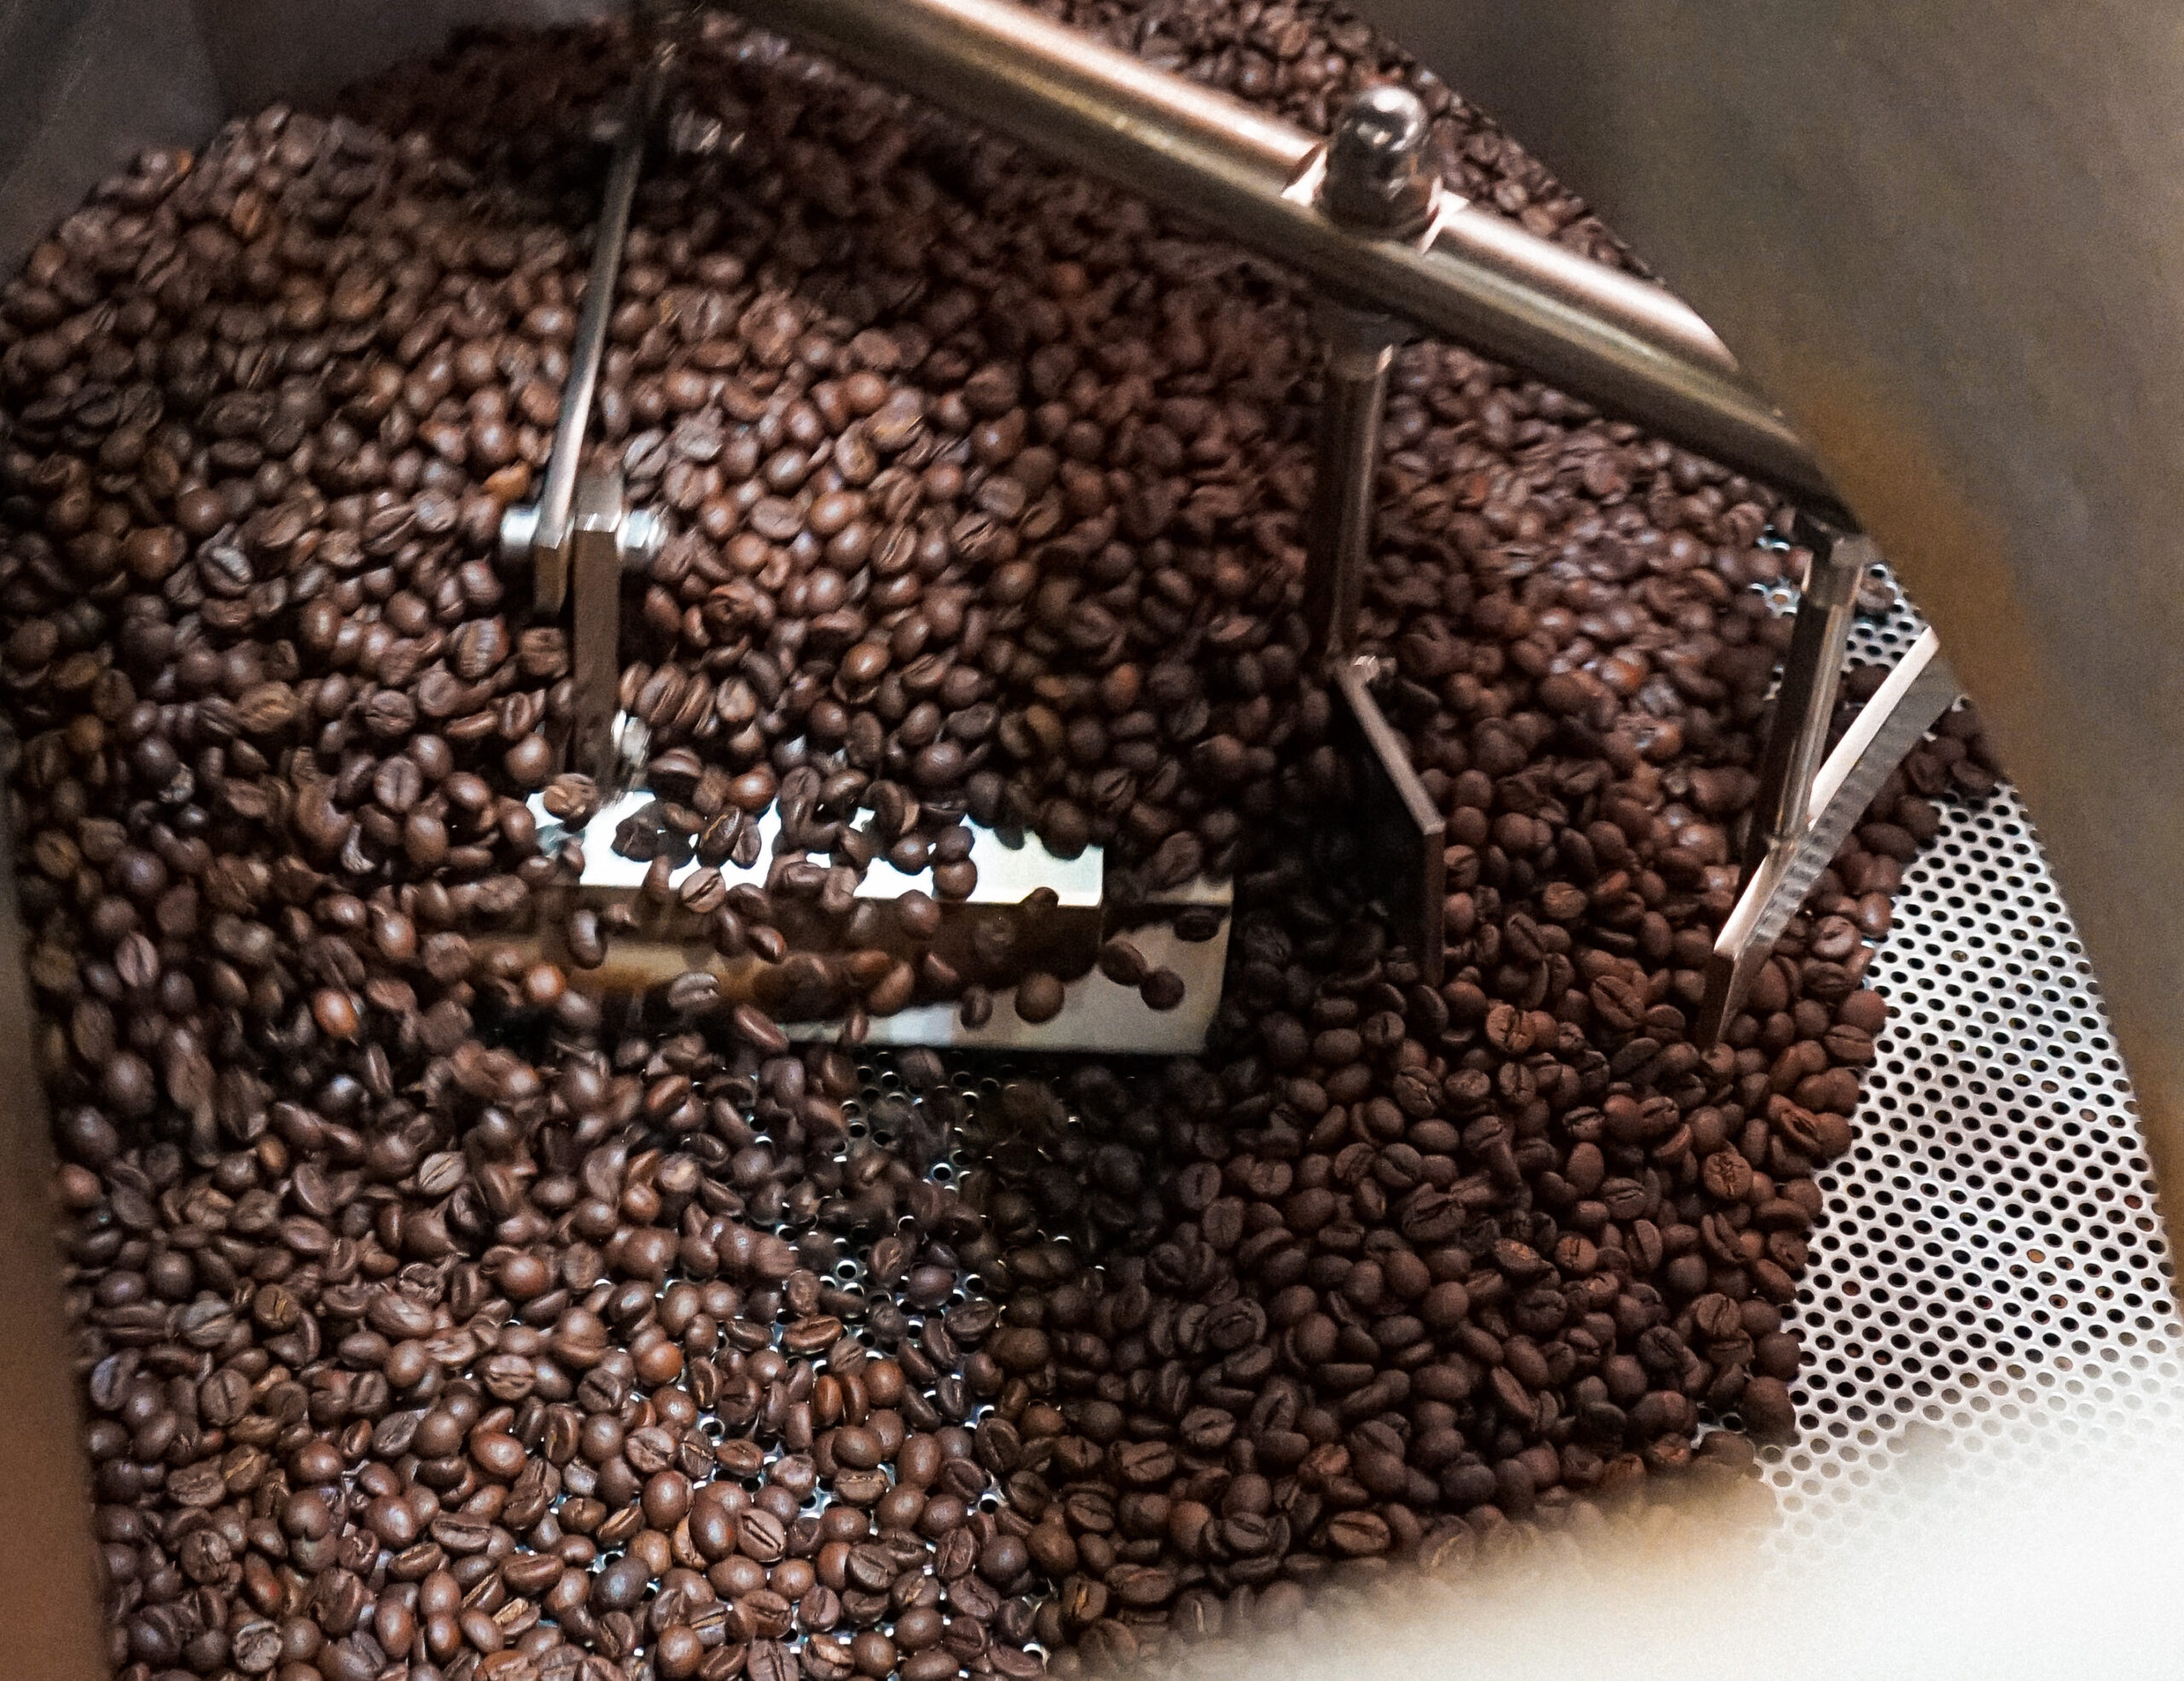 Robusta coffee beans in roaster